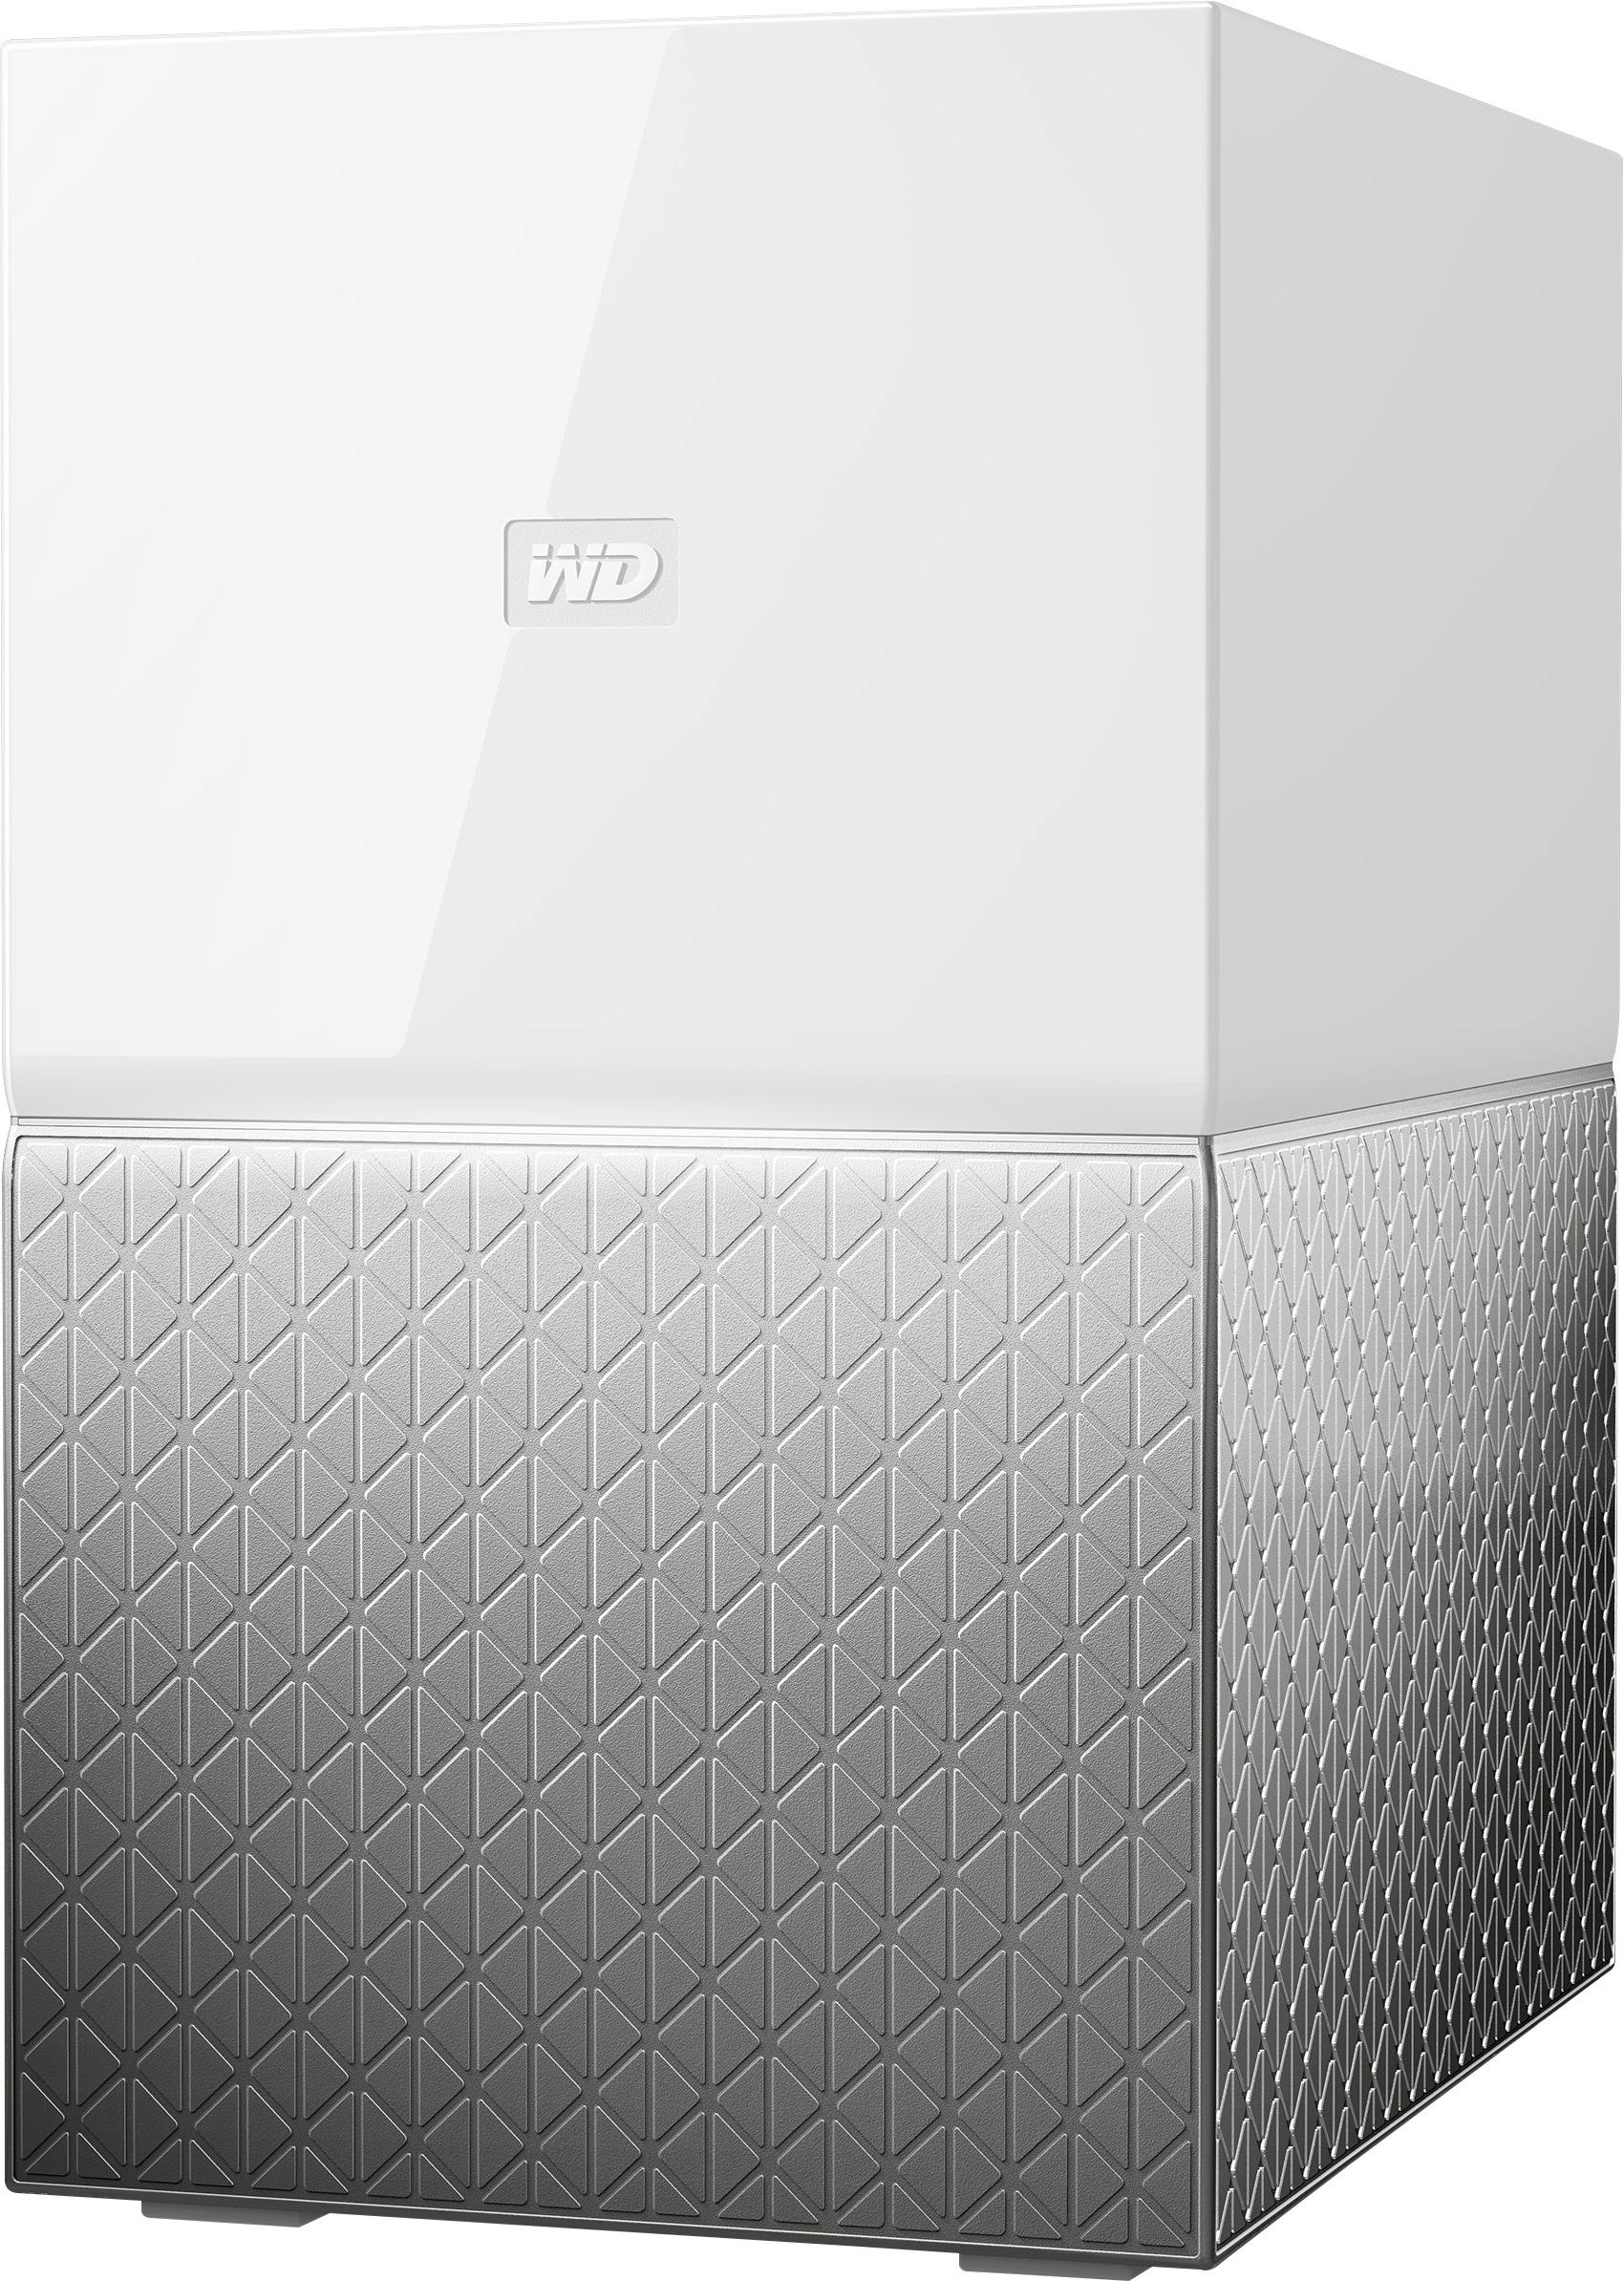 WD My Cloud Home Duo 2-Bay 8TB Personal Cloud White WDBMUT0080JWT-NESN Best Buy